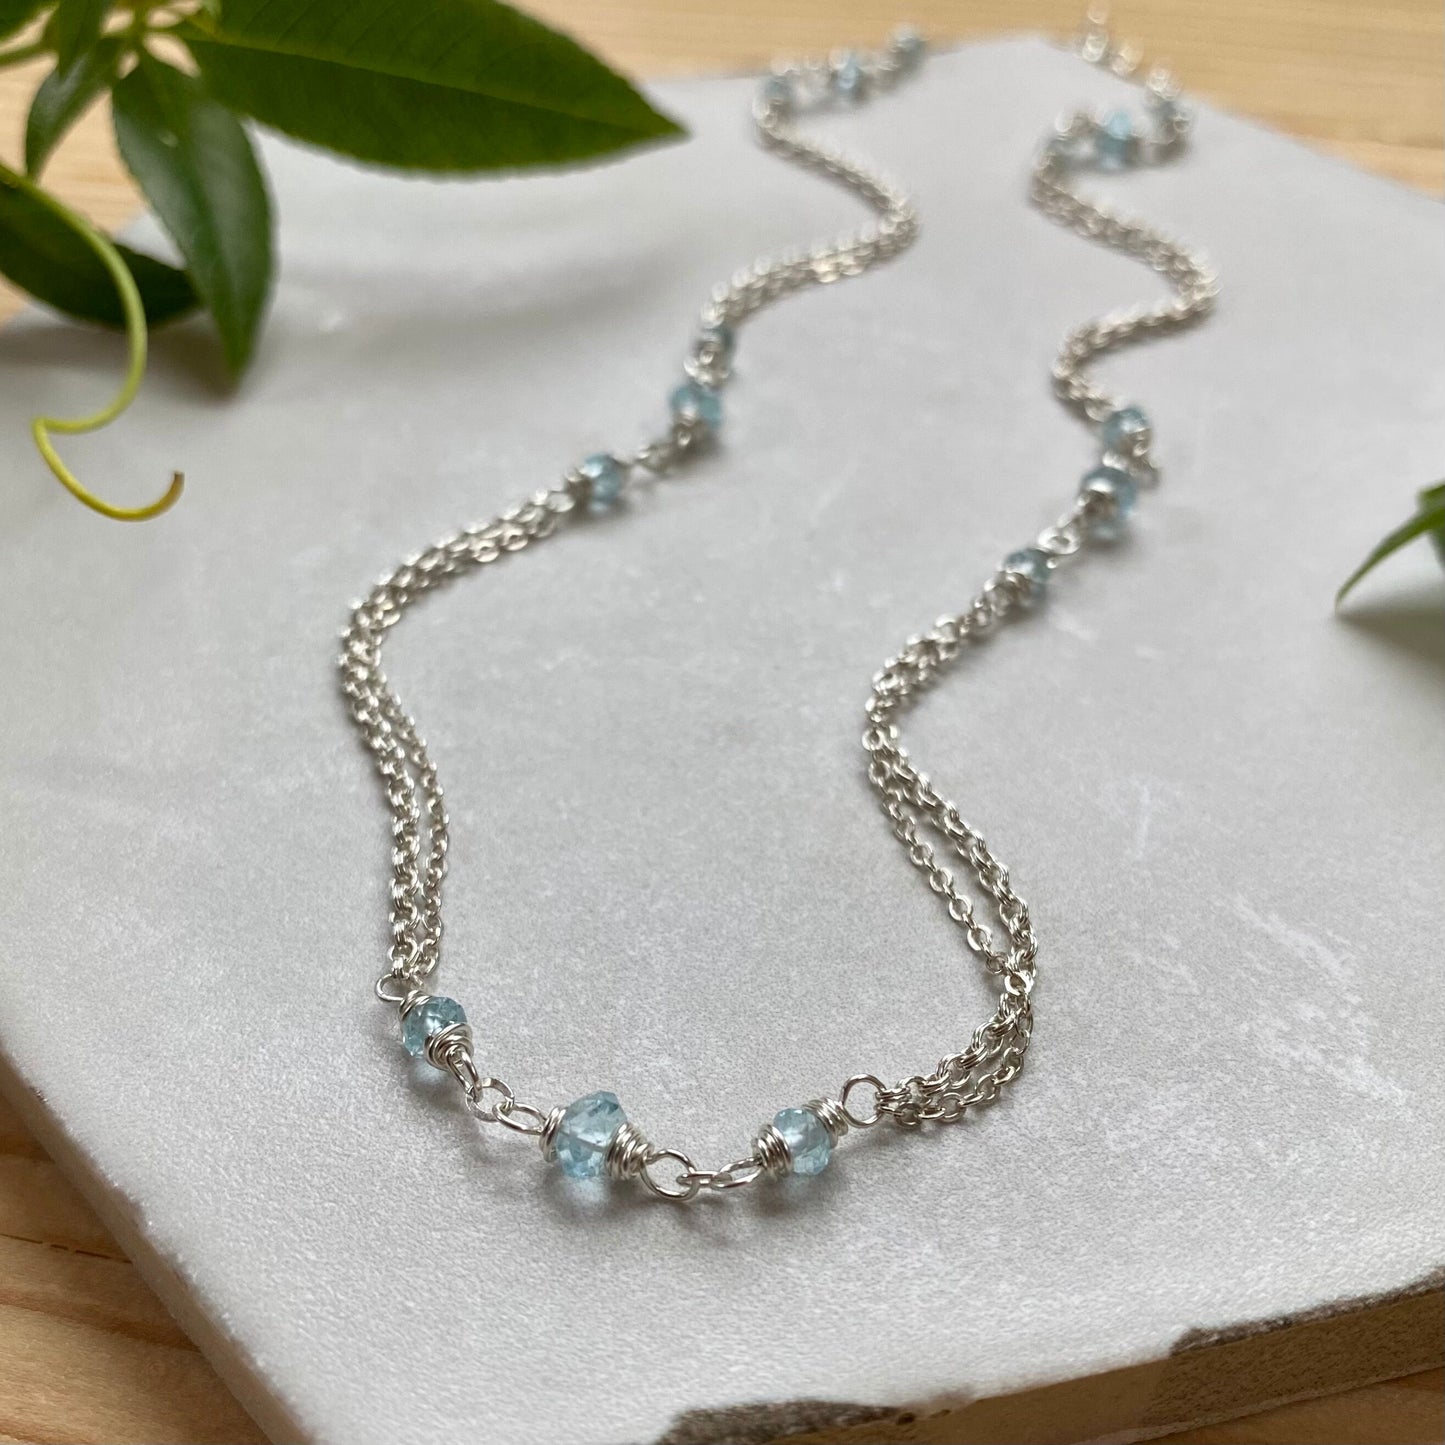 Birthstone Chain Necklace with Your Choice of Gemstones, Sterling Silver Elegant Double Chain Layering Necklace